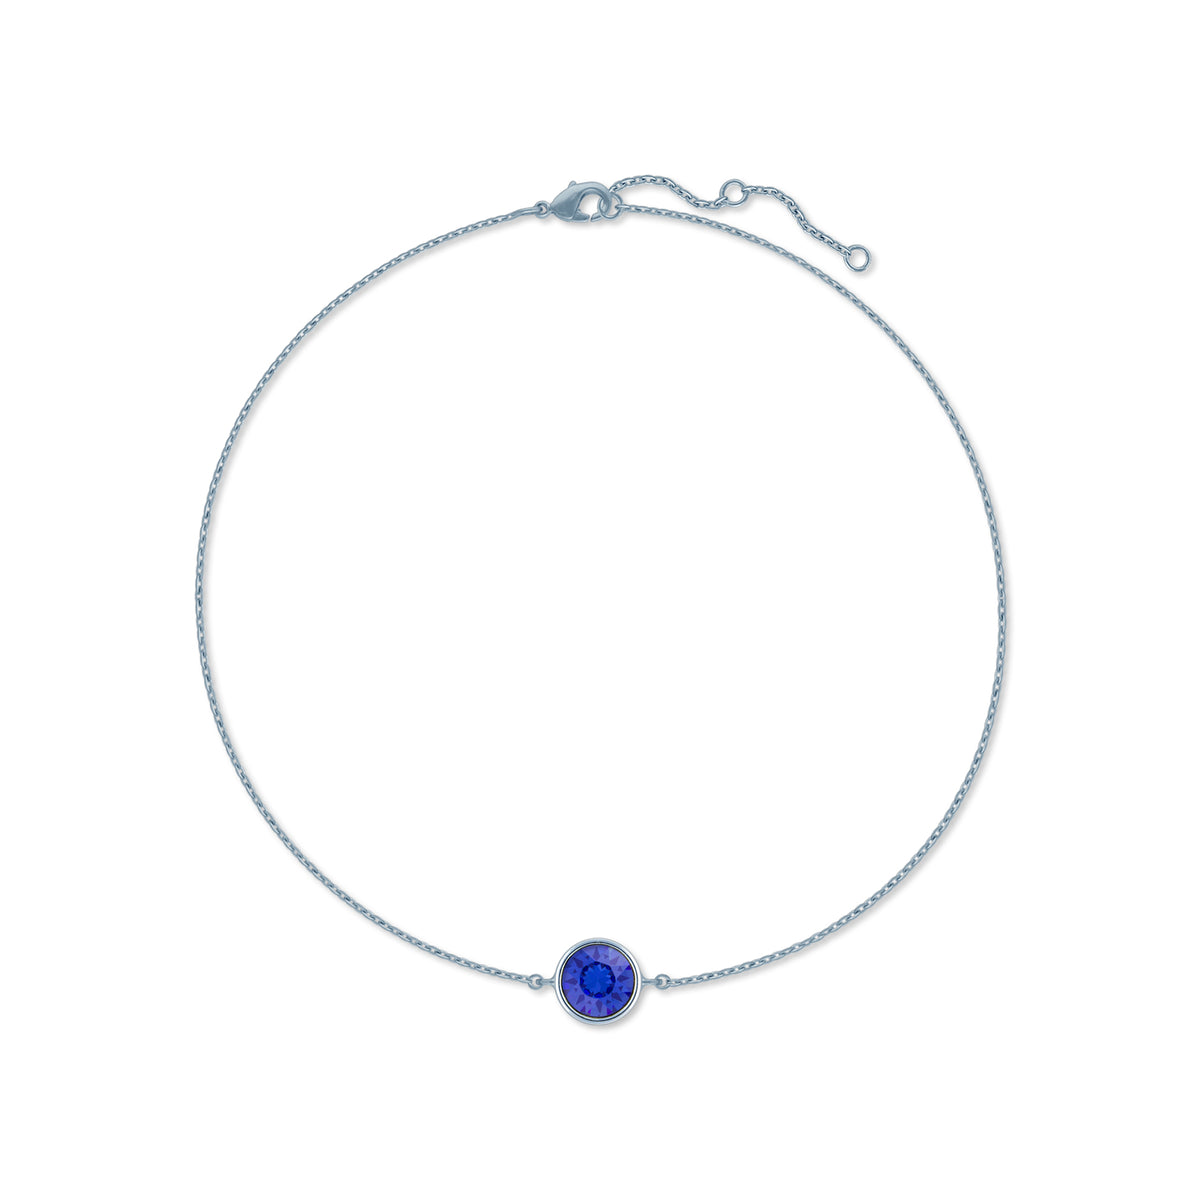 Harley Chain Bracelet with Blue Sapphire Round Crystals from Swarovski Silver Toned Rhodium Plated - Ed Heart